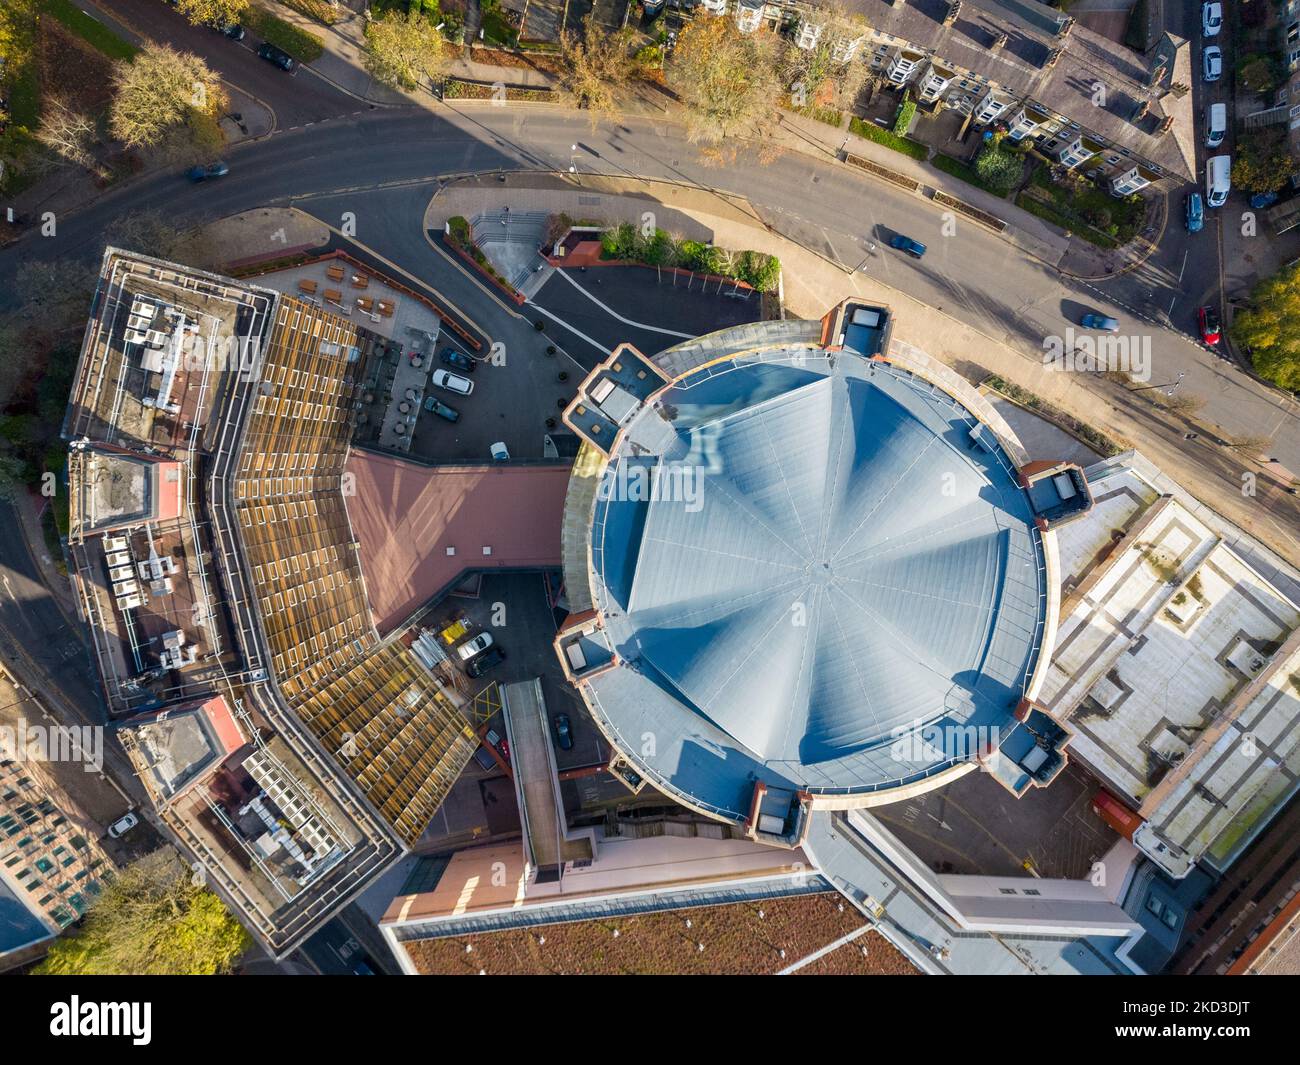 Aerial view of Harrogate Convention Centre and town in North Yorkshire, UK. Modern building for hosting events in the hospitality industry. Stock Photo